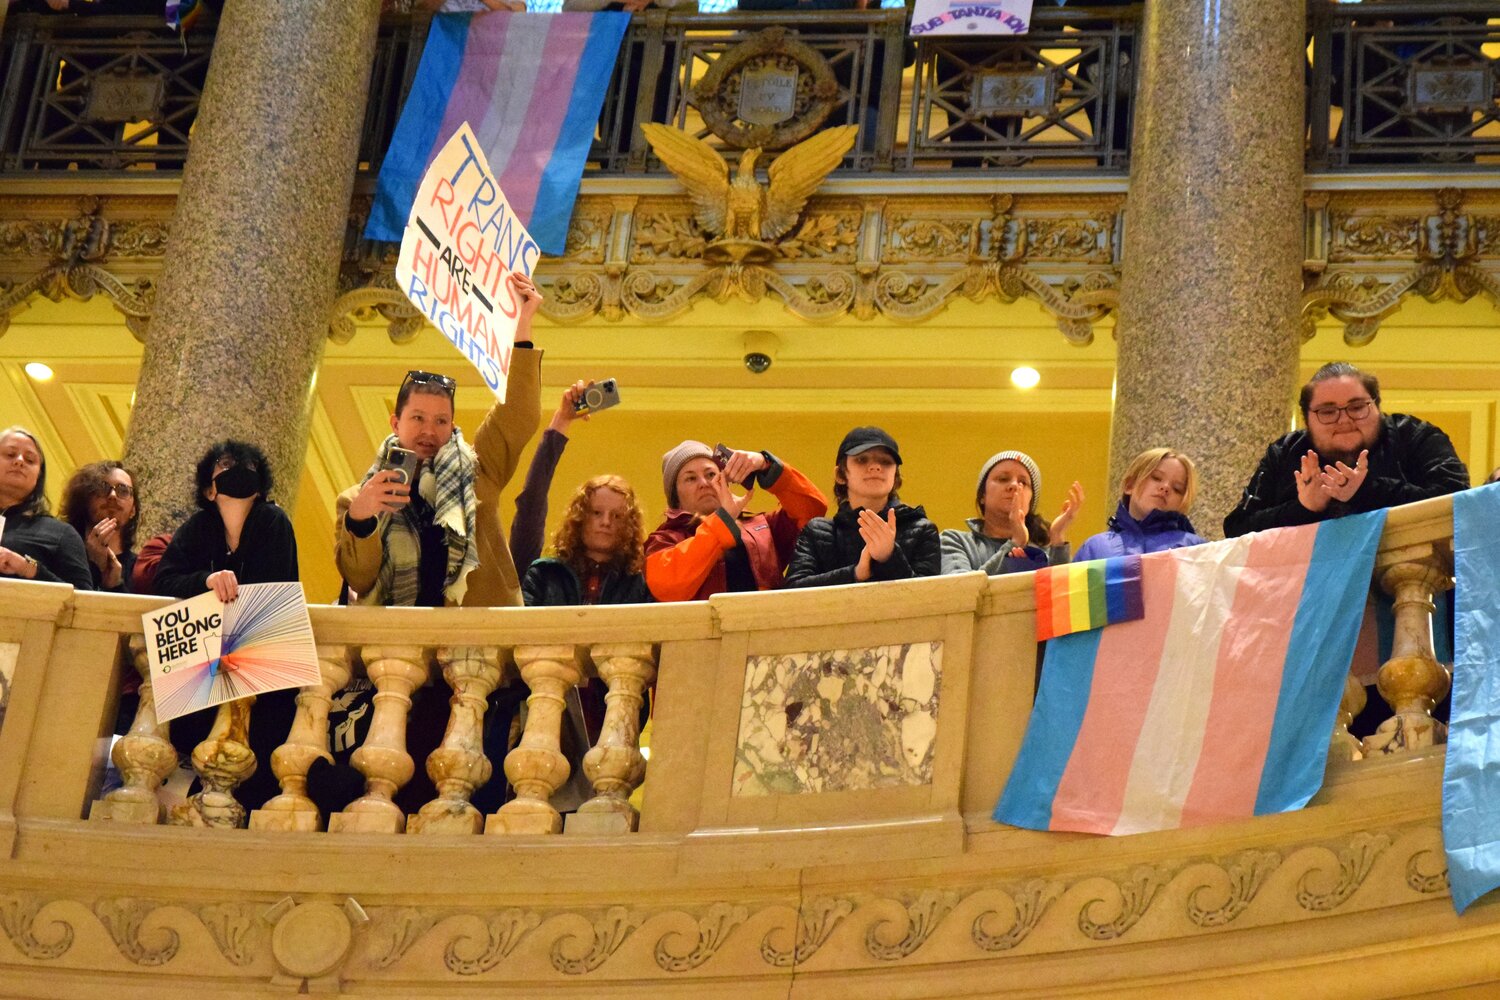 Trans rights advocates pack three levels of the Minnesota Capitol rotunda on March 31, 2023 for Transgender Day of Visibility. “Our visisbility matters,” said Kat Rohn of OutFront Minnesota.